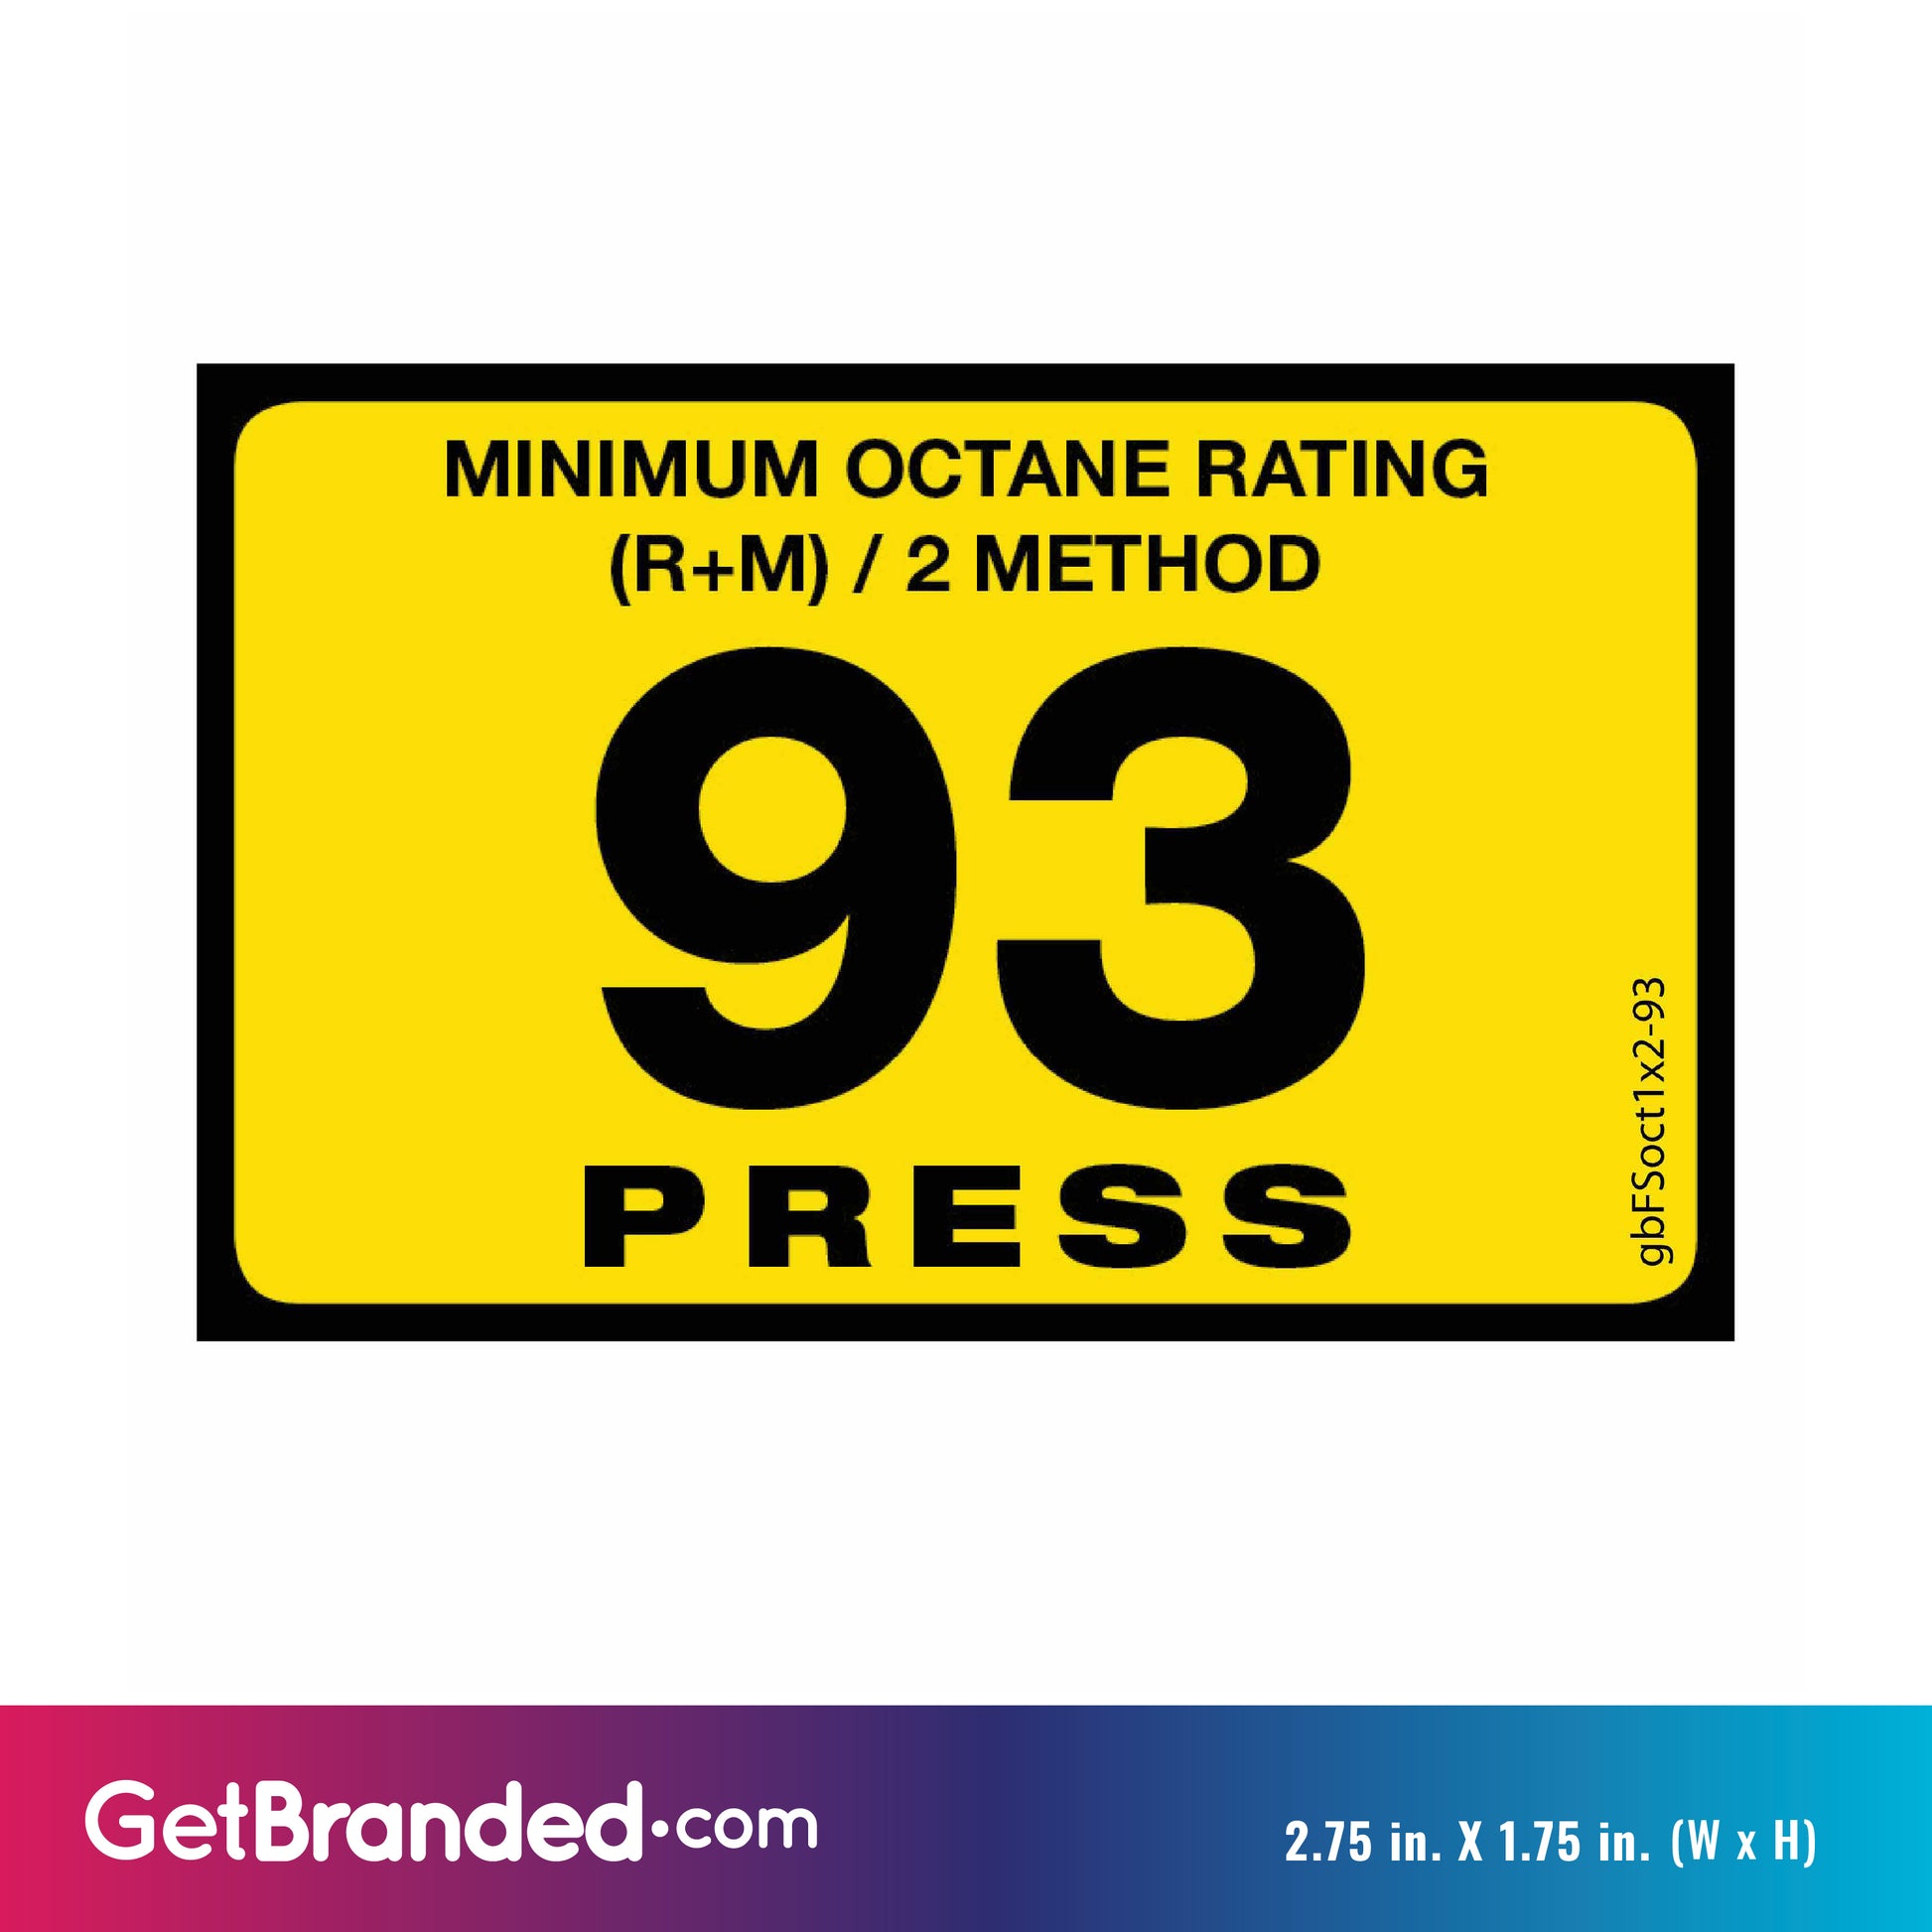 93 Press Octane Rating Decal. 1 inch by 2 inches size guide.